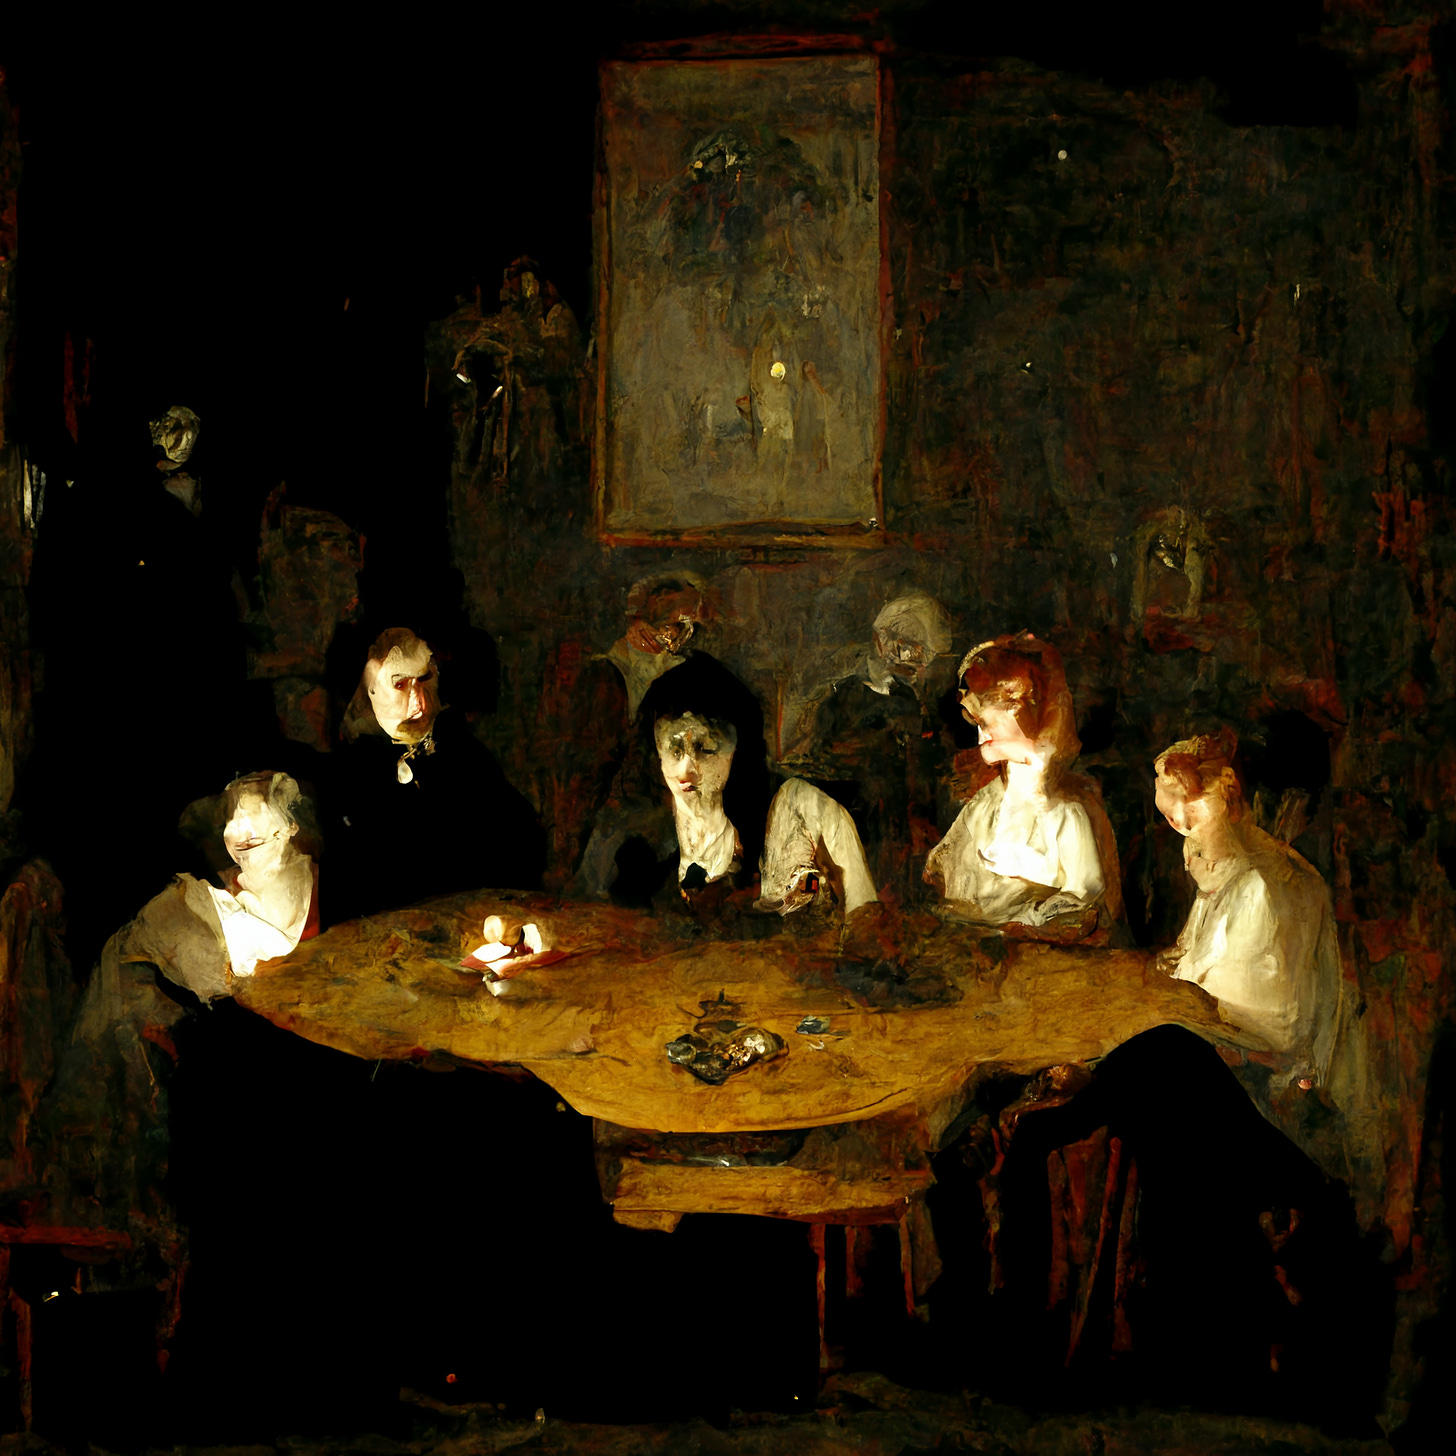 A darkened room with figures sitting around a table at a seance